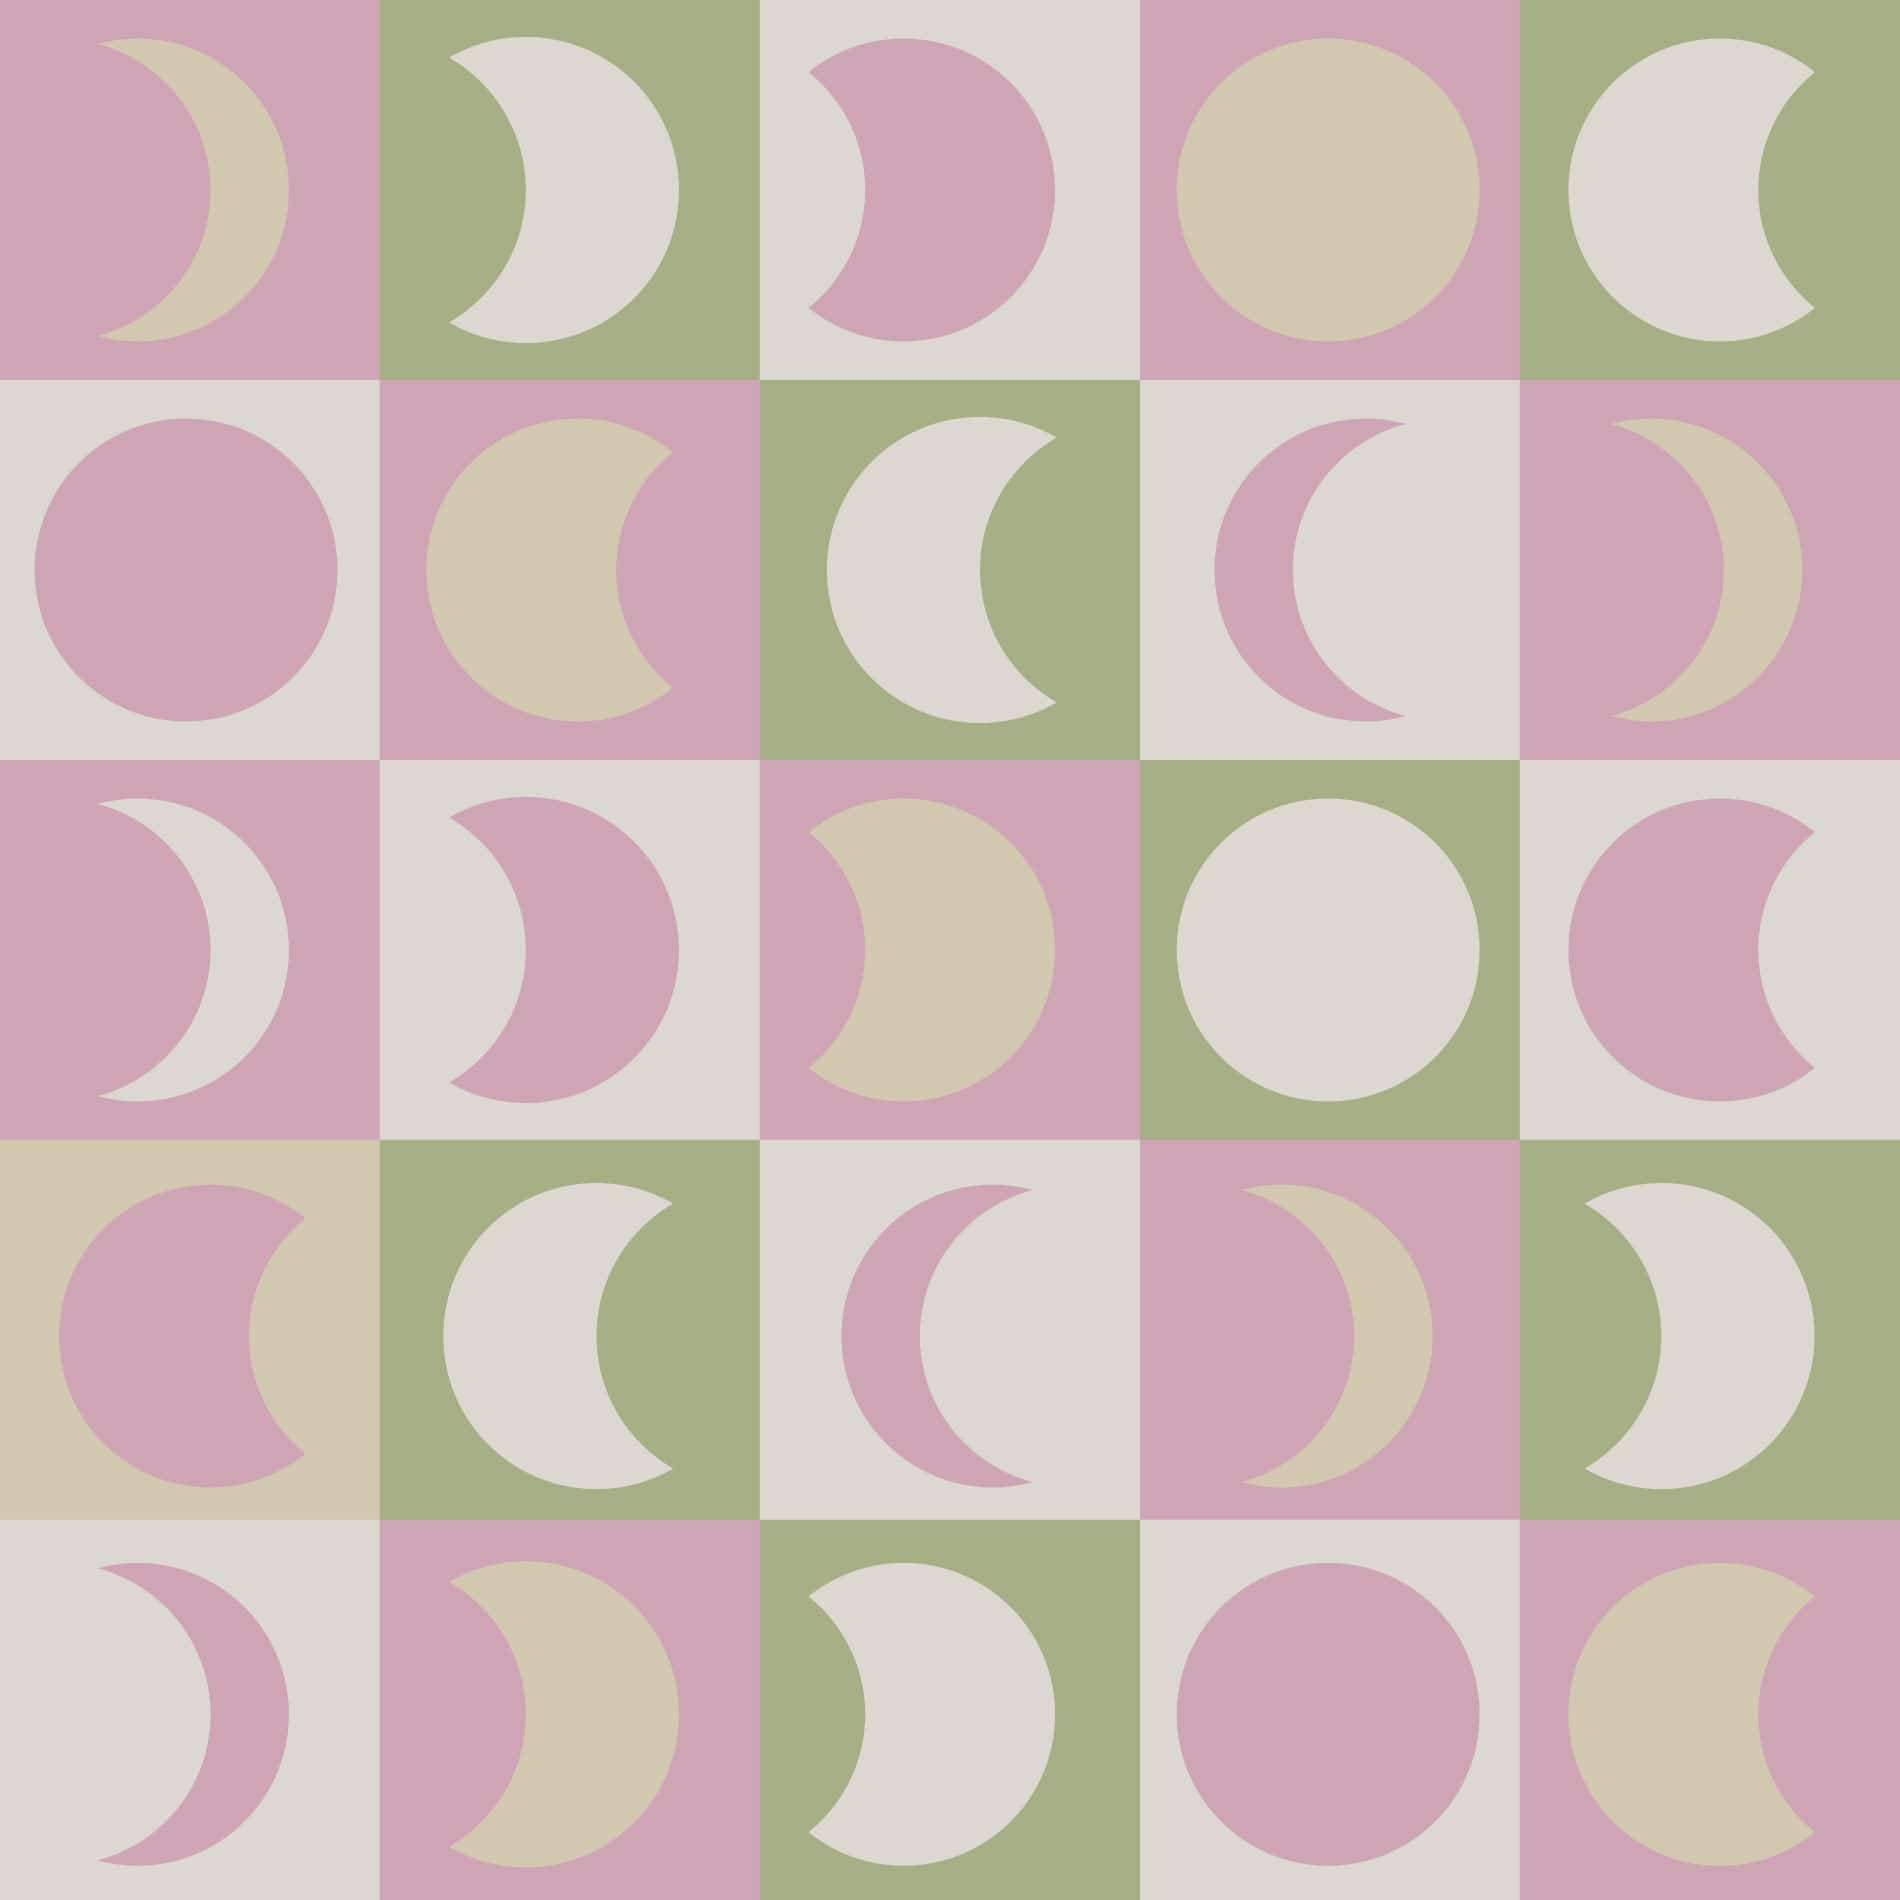 Pastel Moon Phase Wallpaper And Stick Or Non Pasted